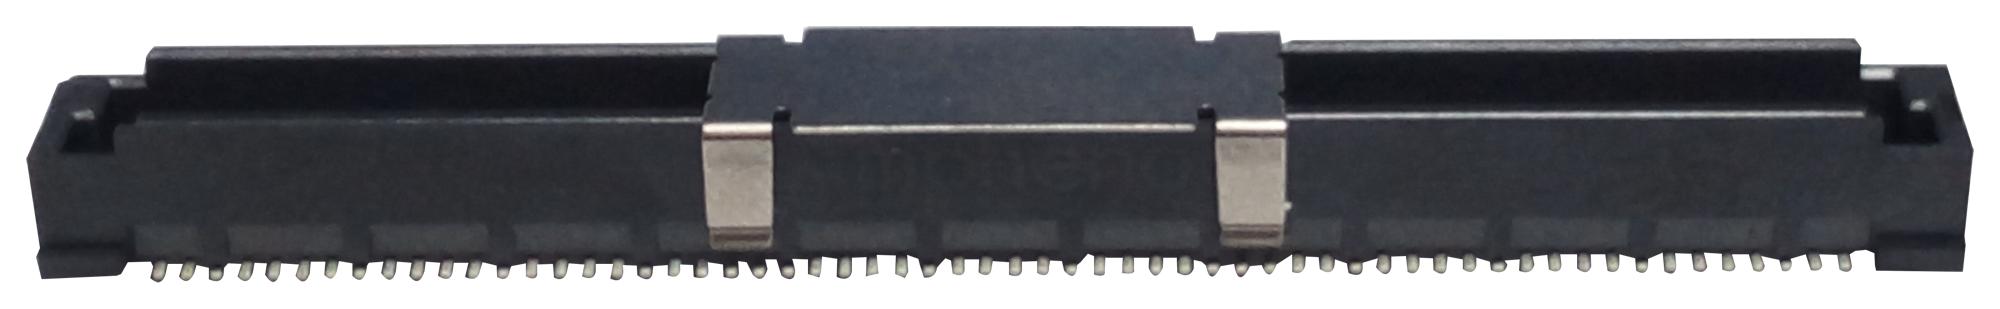 G832MB011201222HR CONNECTOR, RCPT, 120POS, 2ROW, 0.8MM AMPHENOL ICC